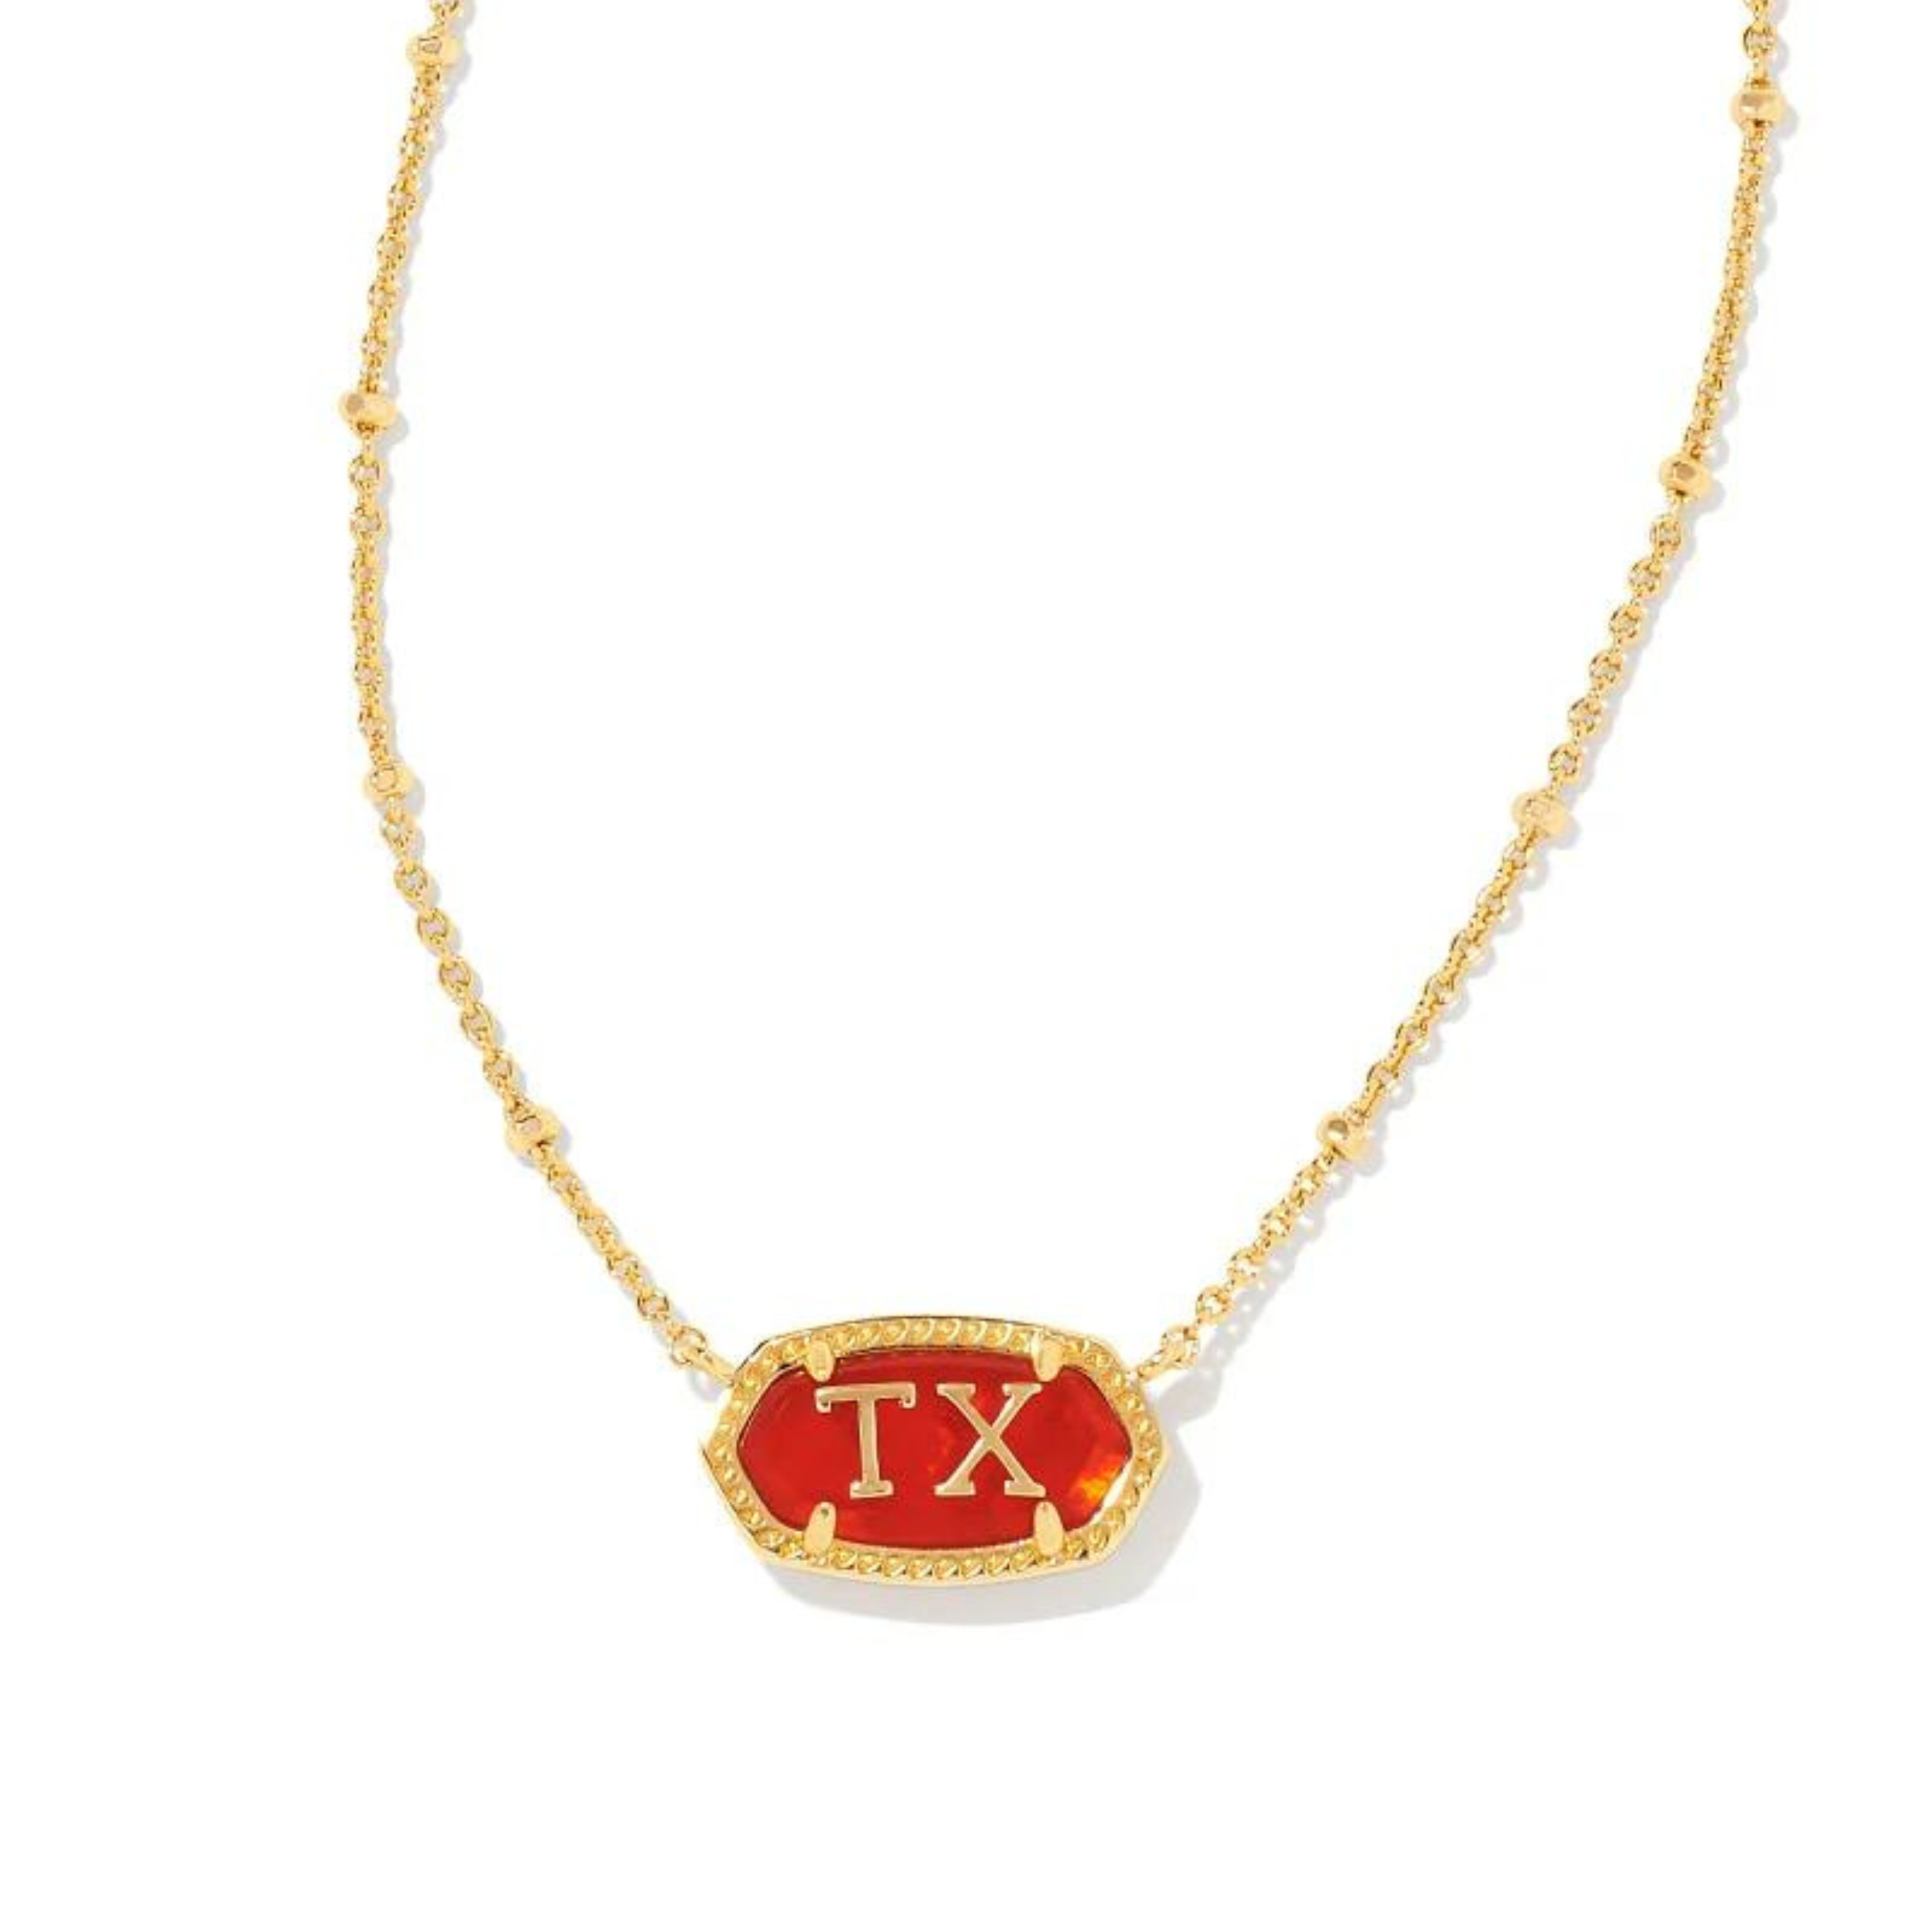 Pictured on a white background is a gold chain necklace with a red stone, oval pendant. This pendant has a gold outline and gold "TX" in the center.  